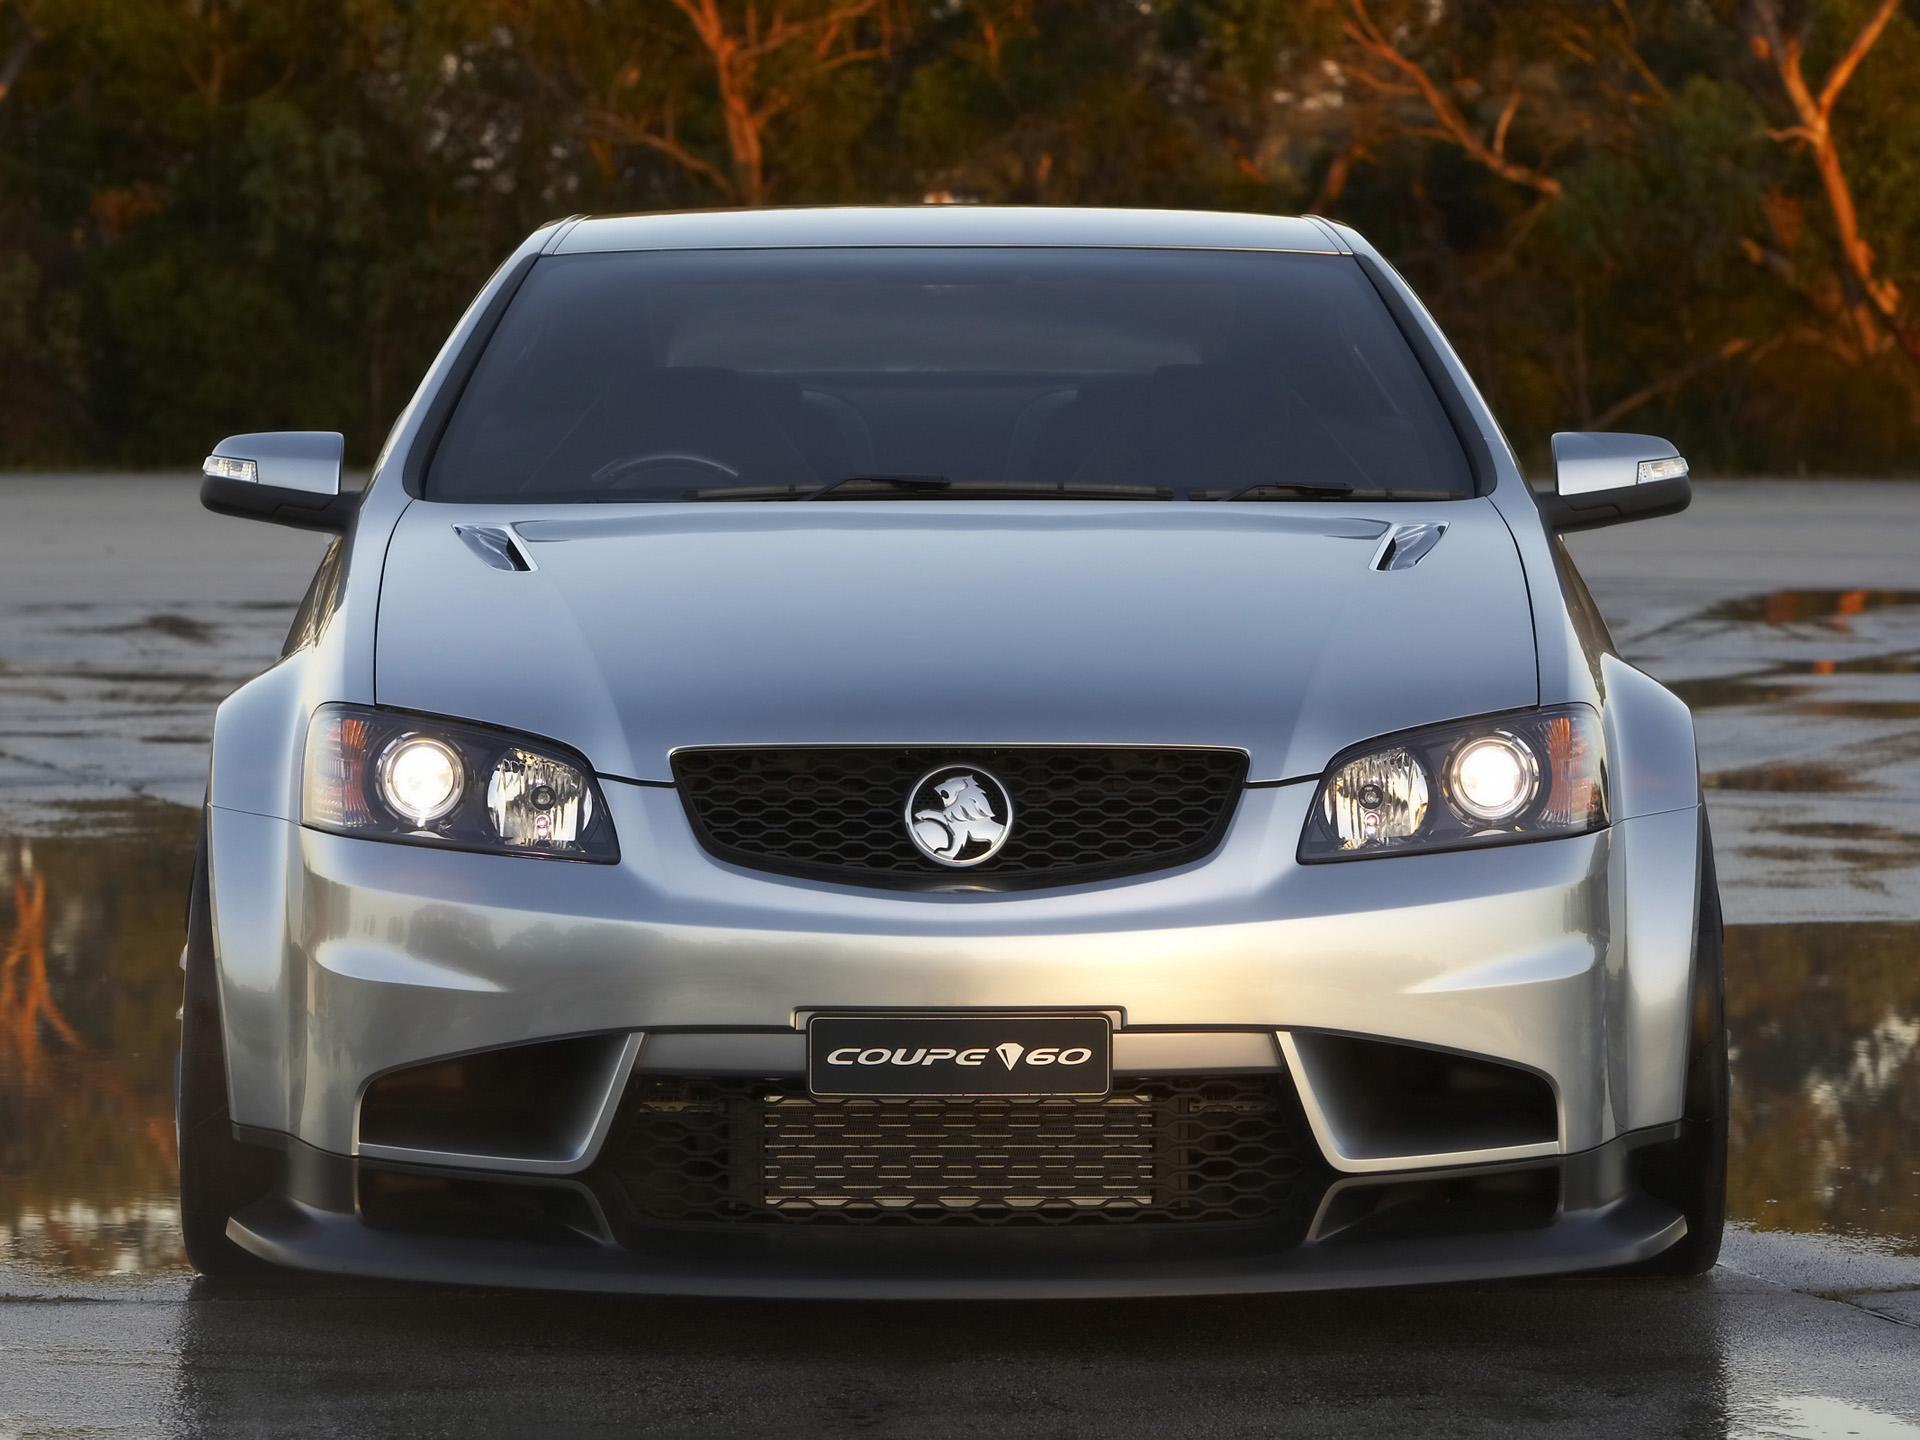 High Resolution Wallpaper | Holden Coupe 60 1920x1440 px